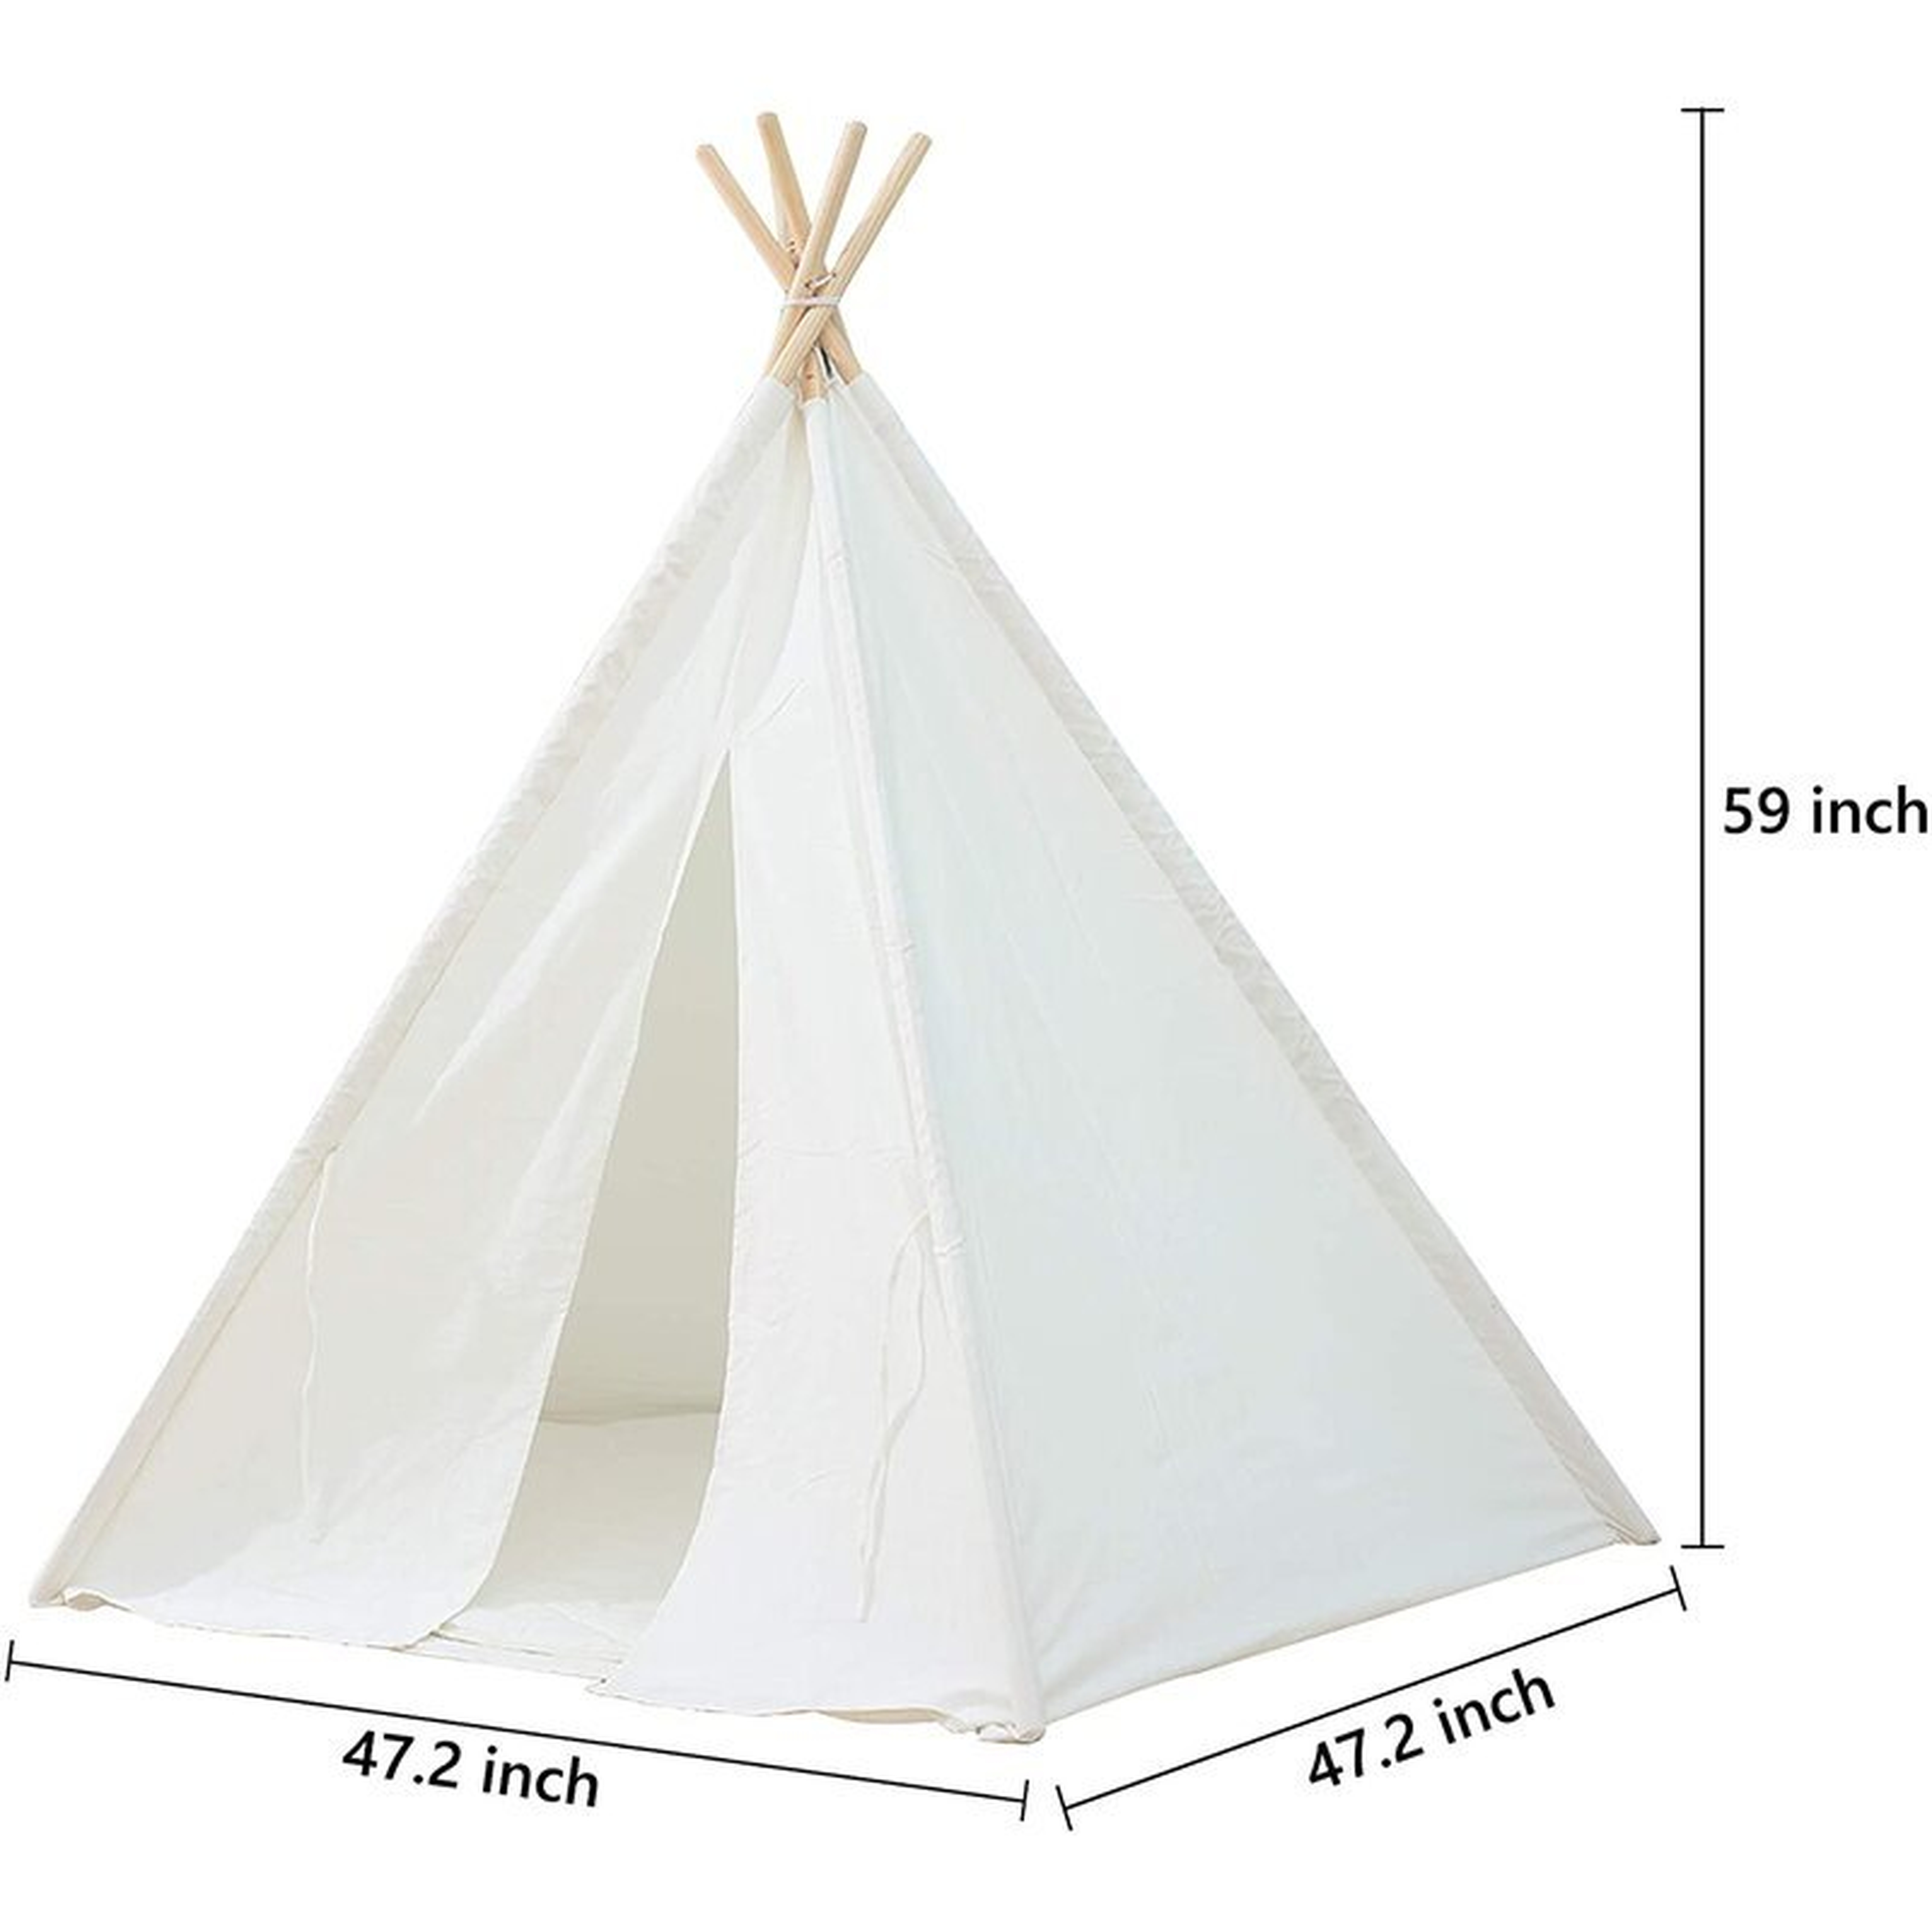 Kids Teepee Tent - Portable Kids Play Tent,Pure Cotton Children Foldable Tent With Mat,Kids Playhouse , Great For Girls/Boys Indoor & Outdoor Playing (No Windows),White - Wayfair